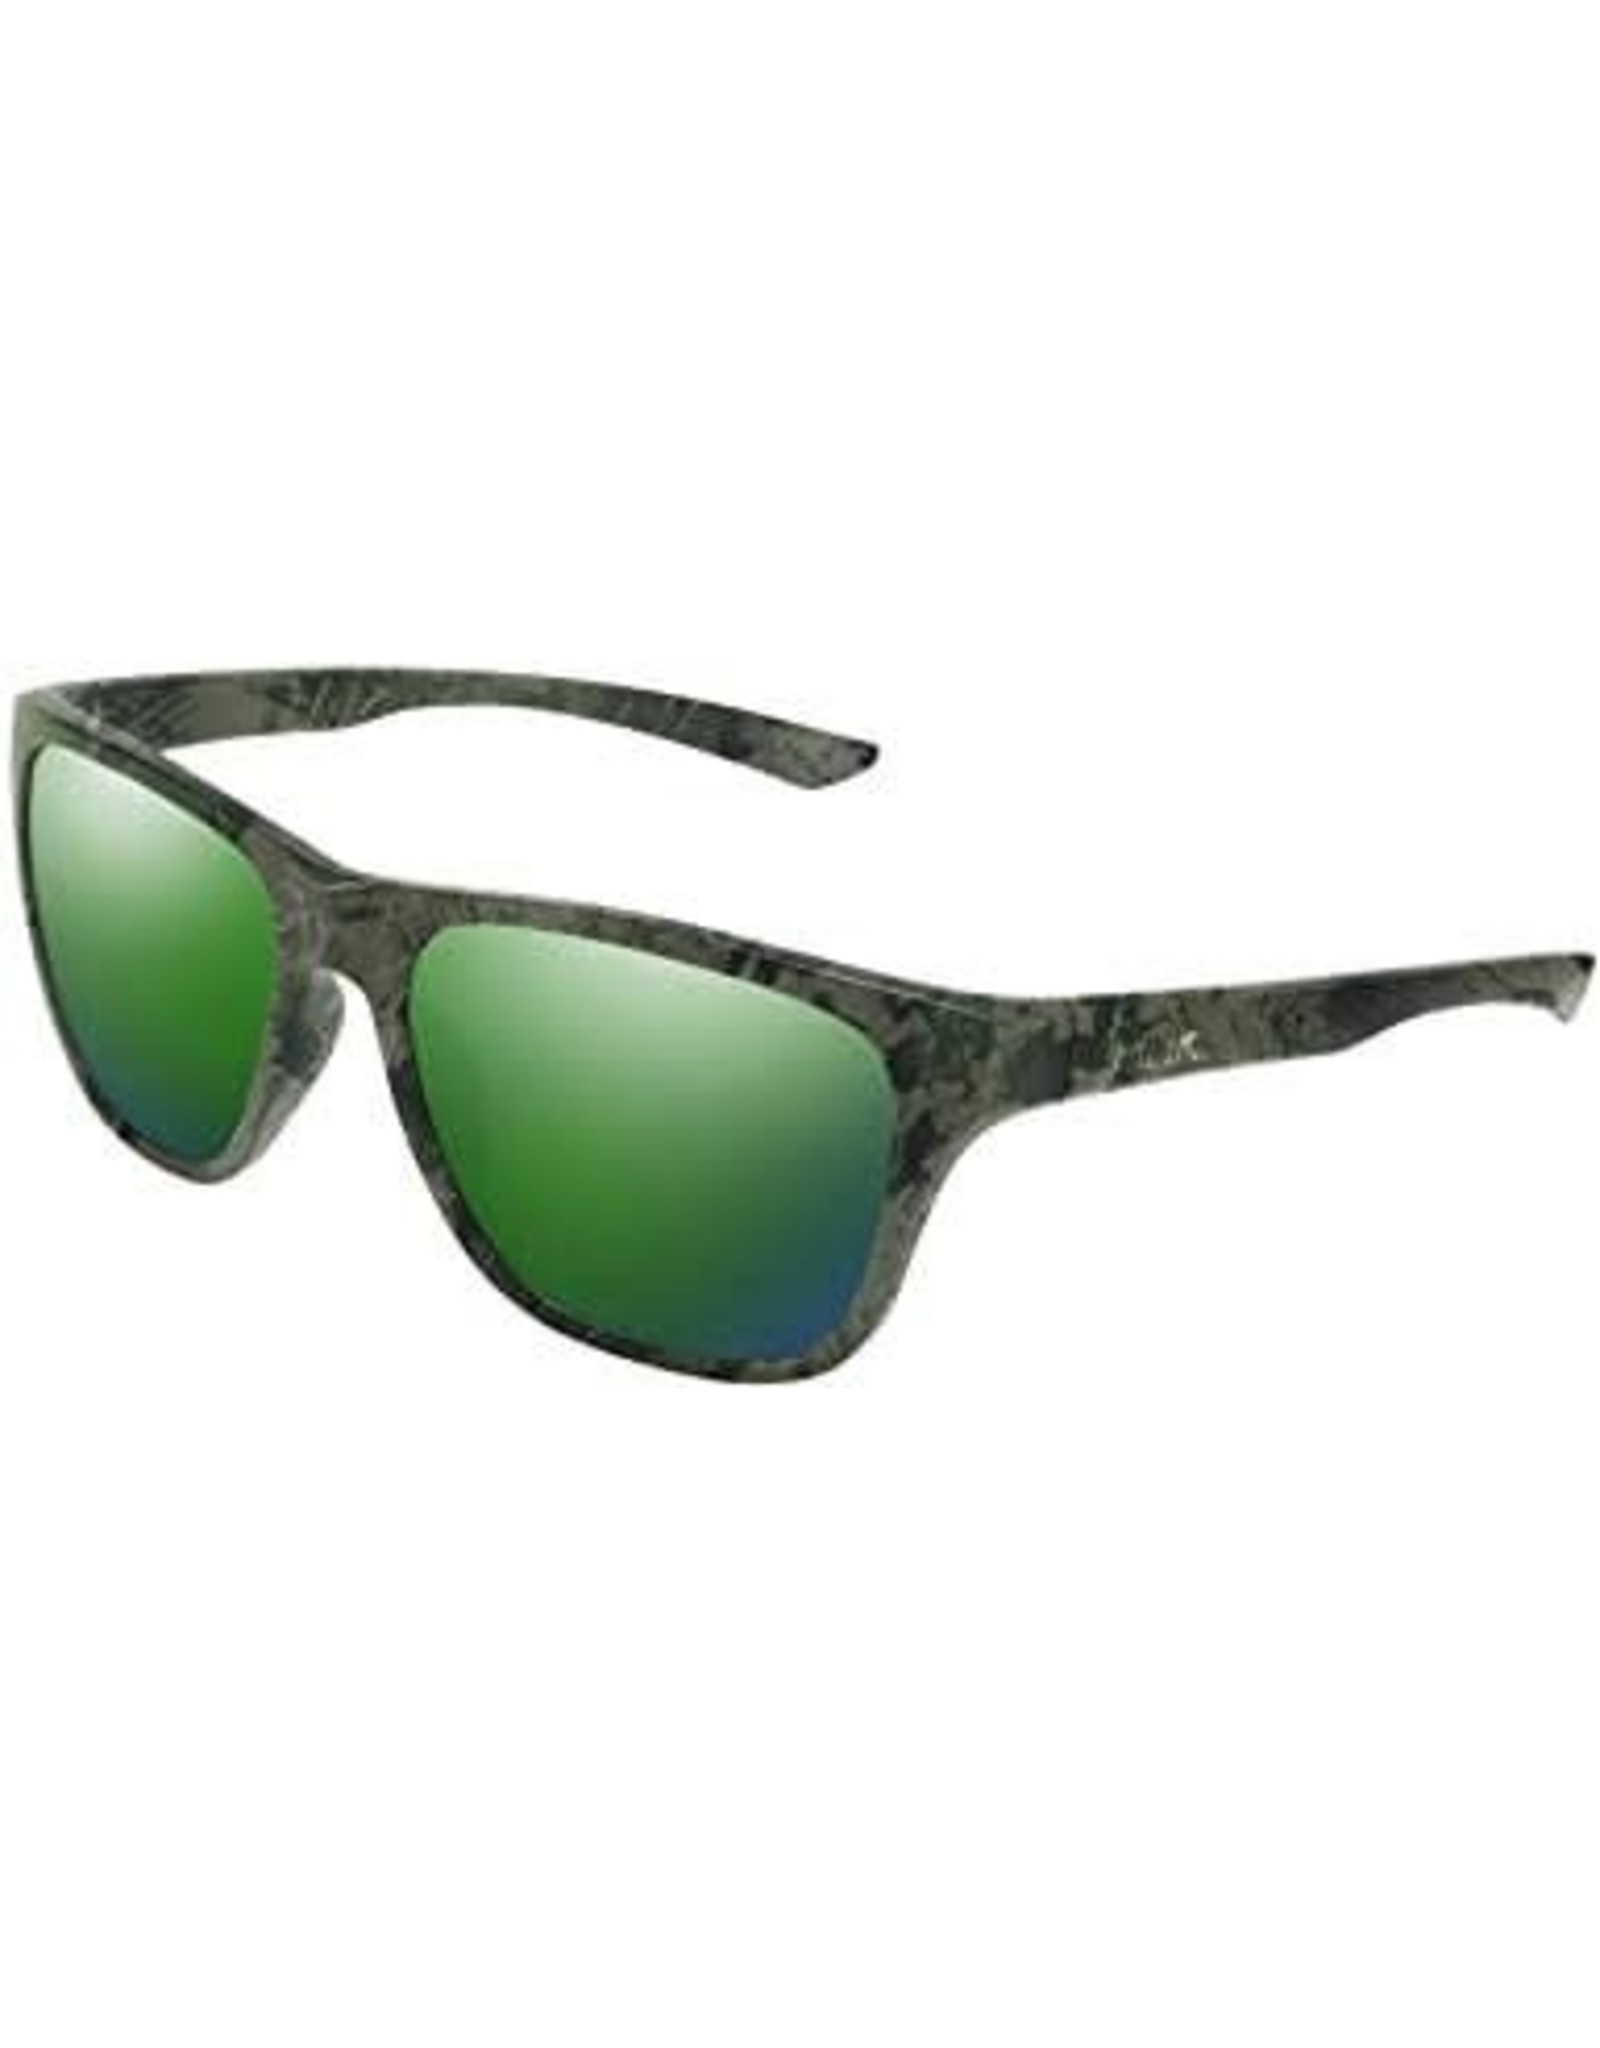 Huk Swivel Polarized Sunglasses, Mirror Green Lens / Southern Tier Frame by Huk